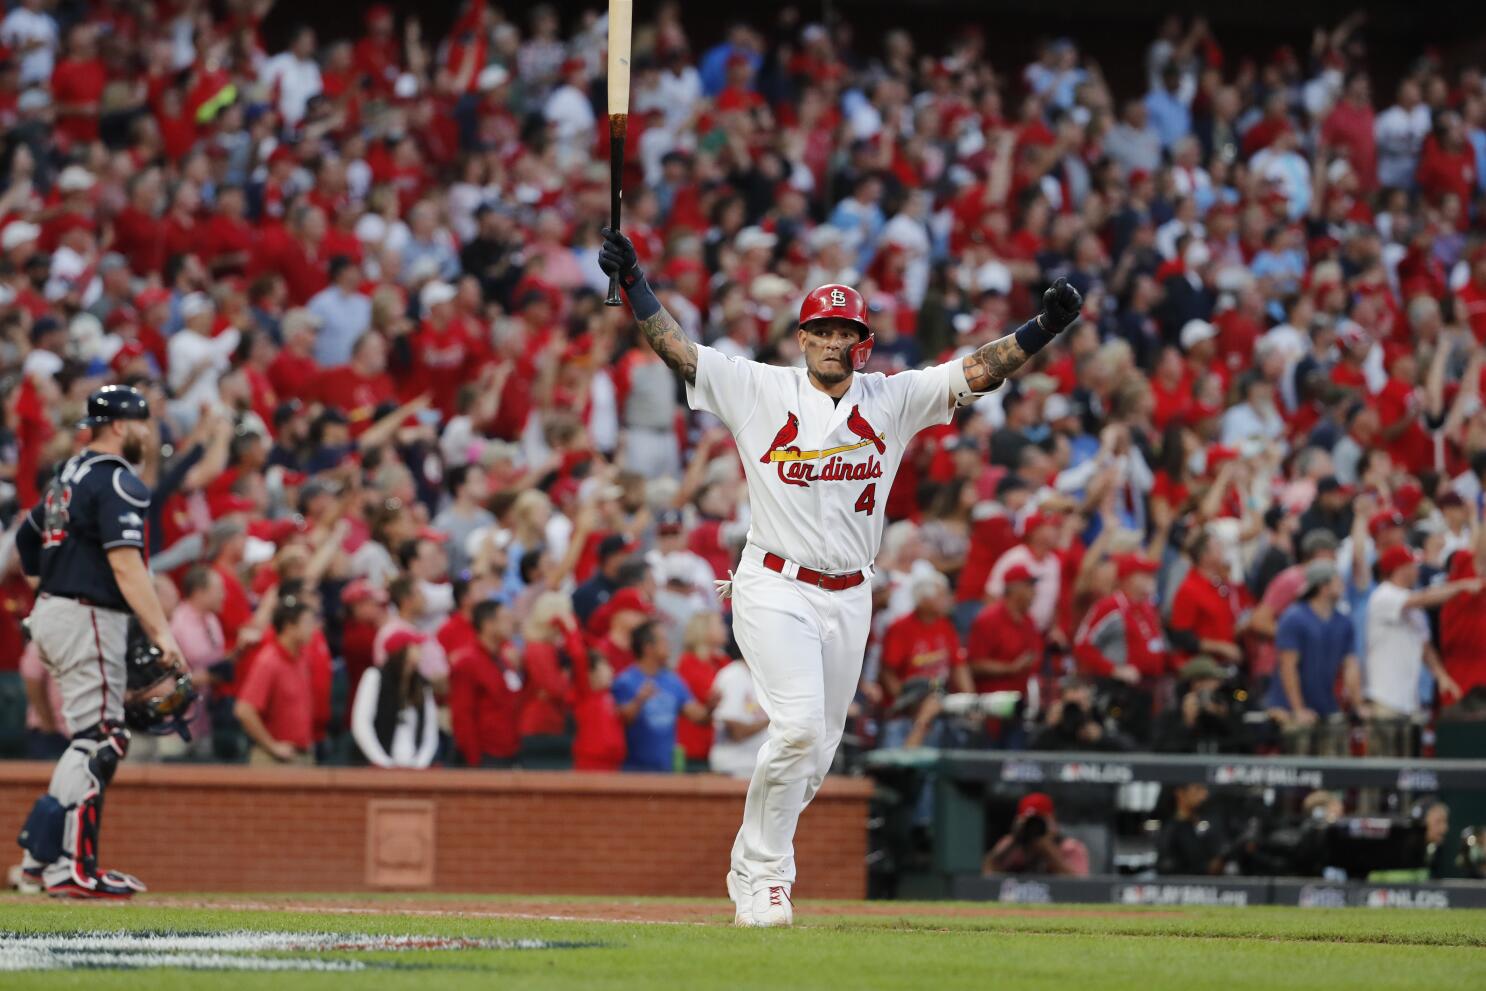 Yadier Molina May Have Had a Good Reason for Near-Brawl With Manager